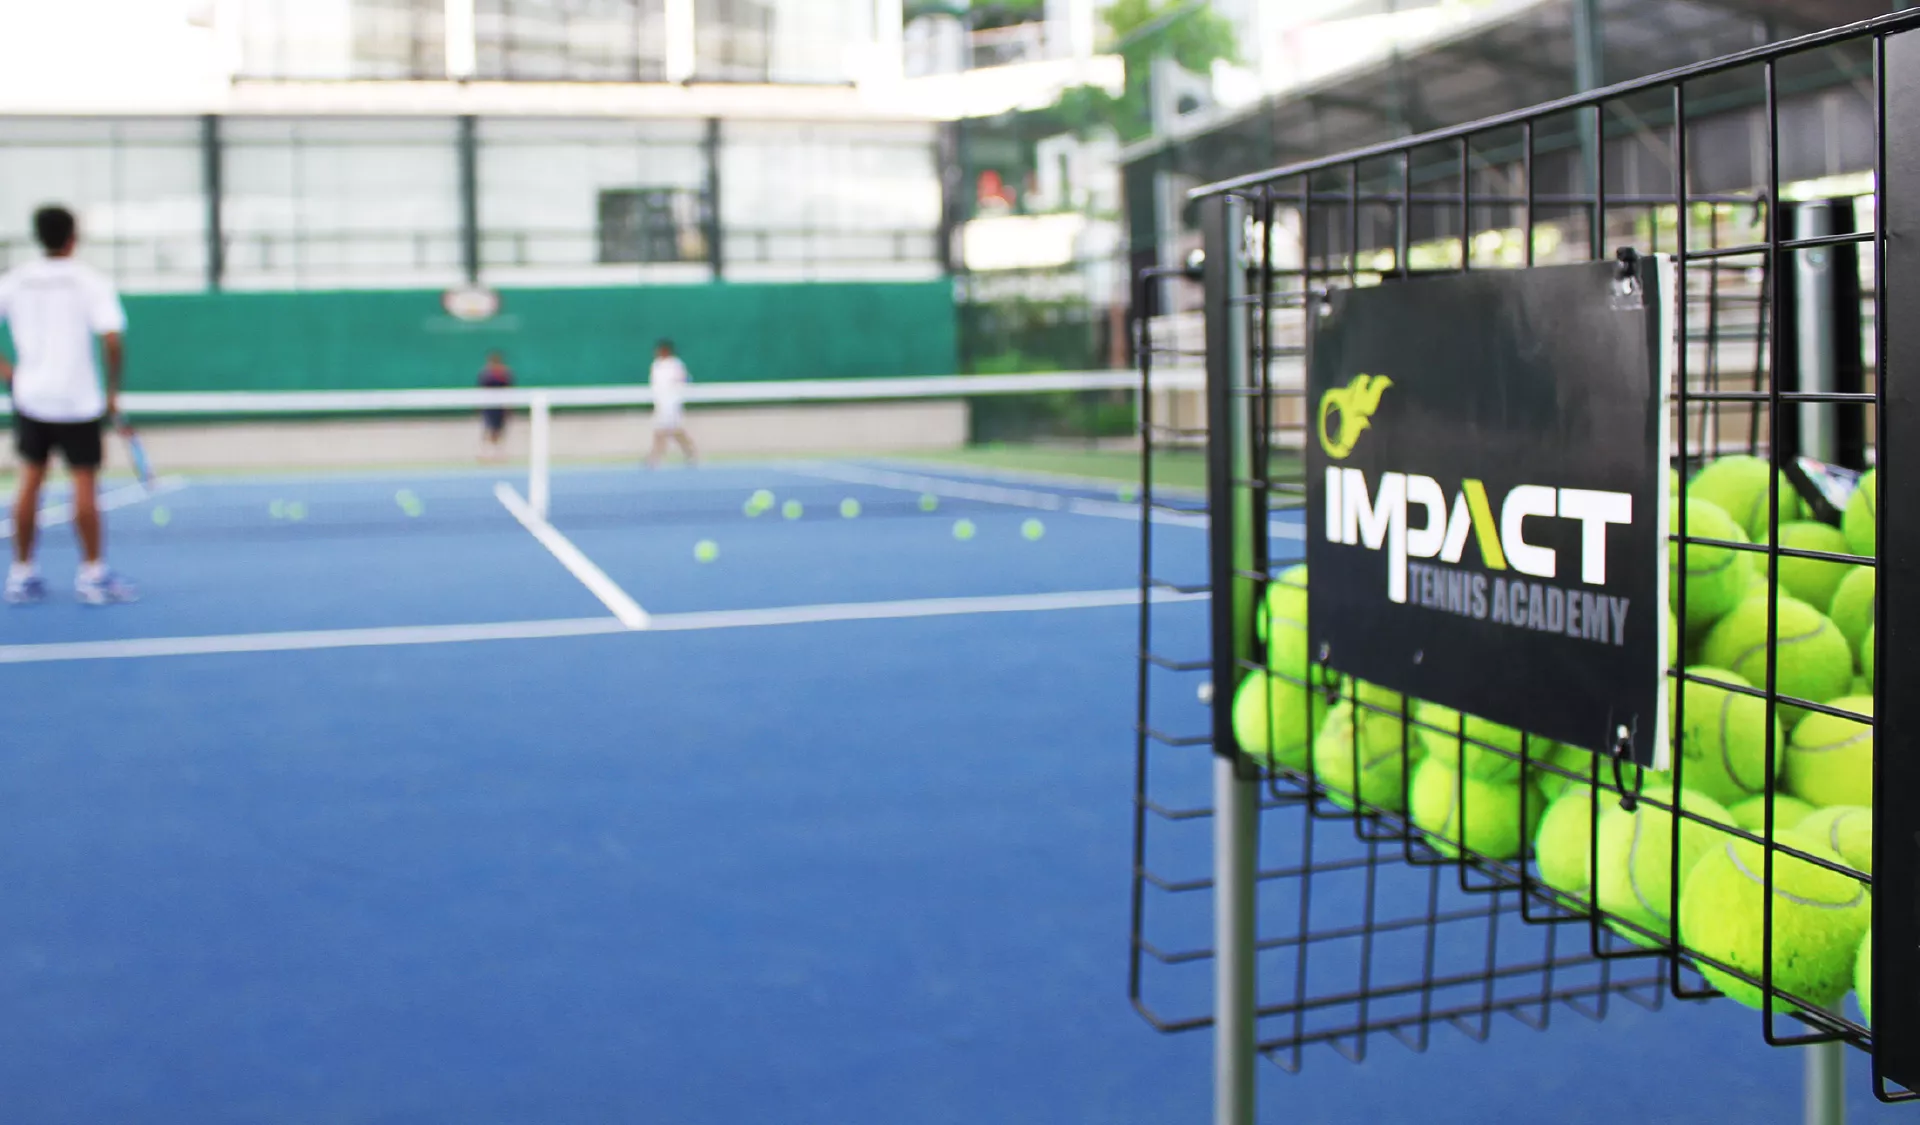 Impact Tennis Academy in Thailand, Central Asia | Tennis - Rated 1